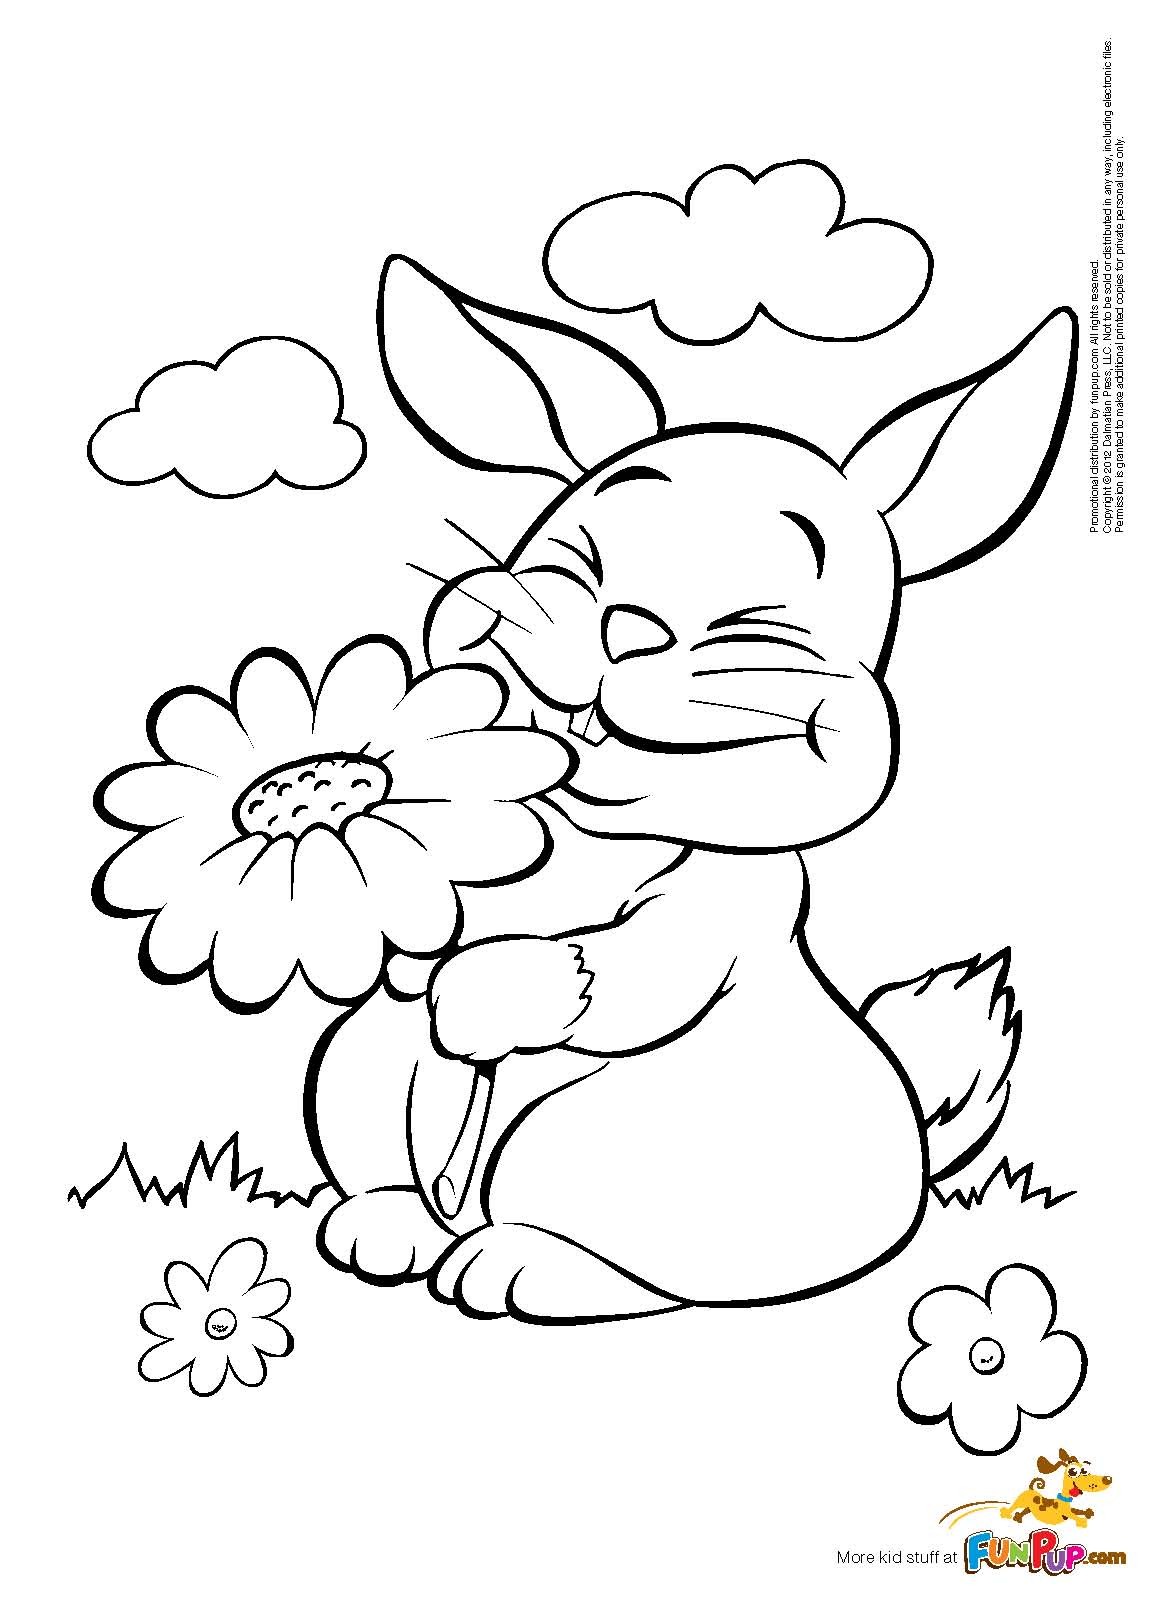 March Coloring Pages at Free printable colorings